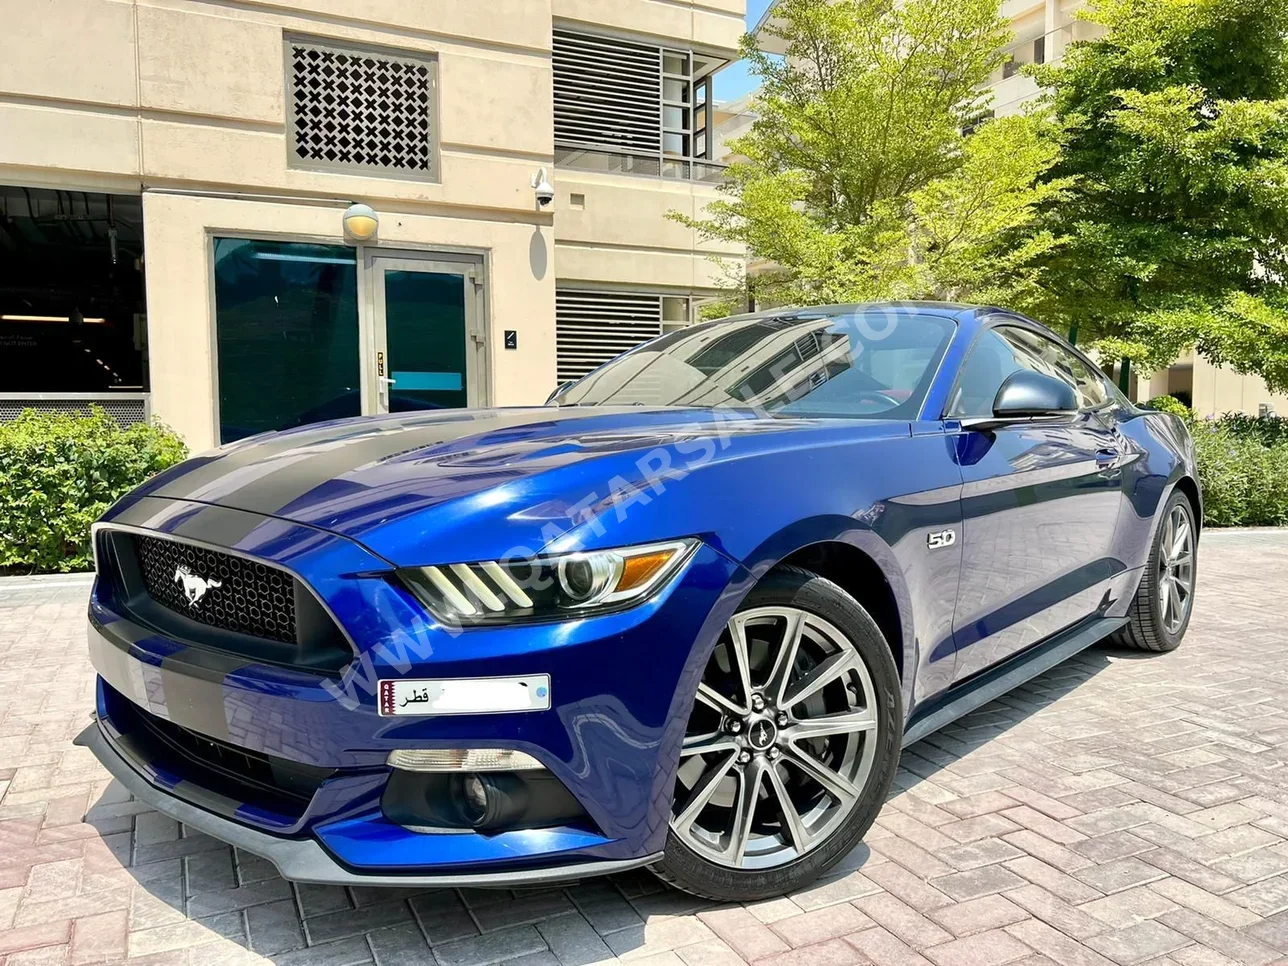 Ford  Mustang  GT  2016  Automatic  35,000 Km  8 Cylinder  Rear Wheel Drive (RWD)  Coupe / Sport  Blue